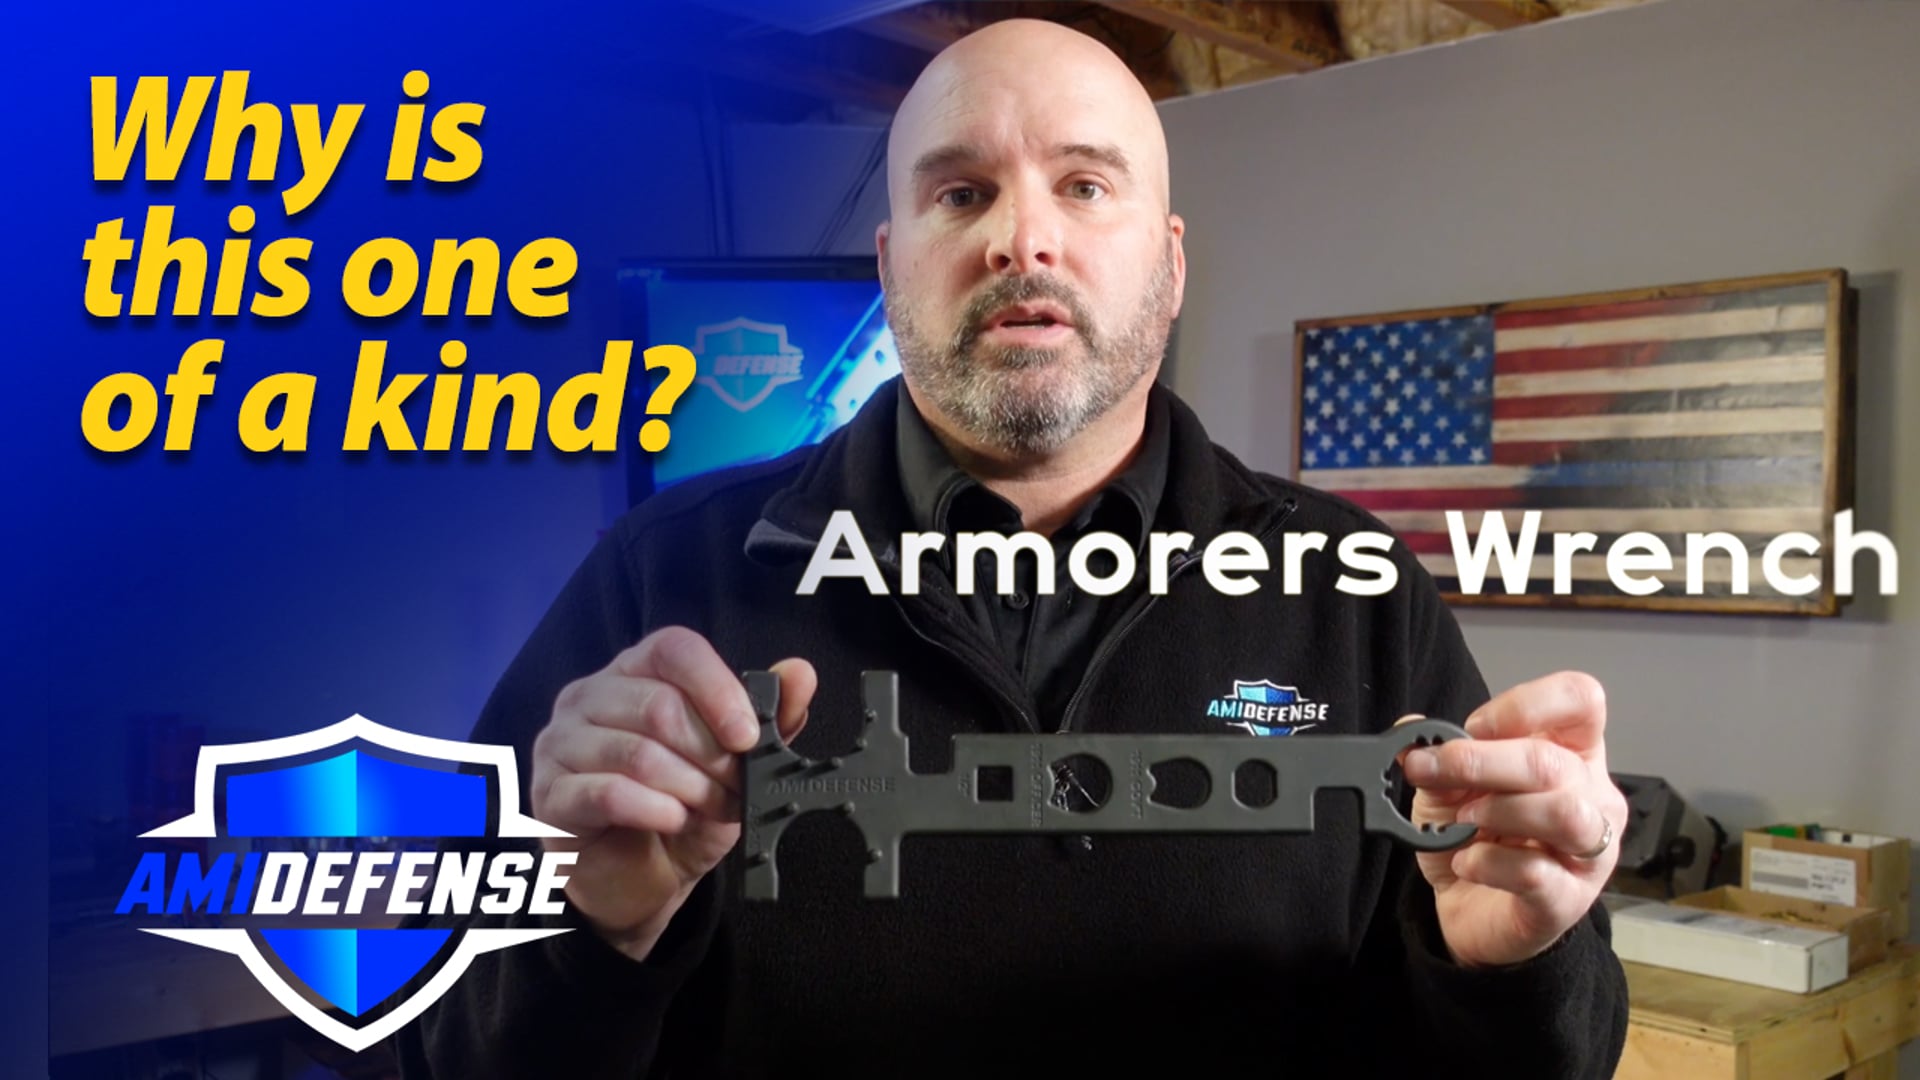 Armorers Wrench - a new model